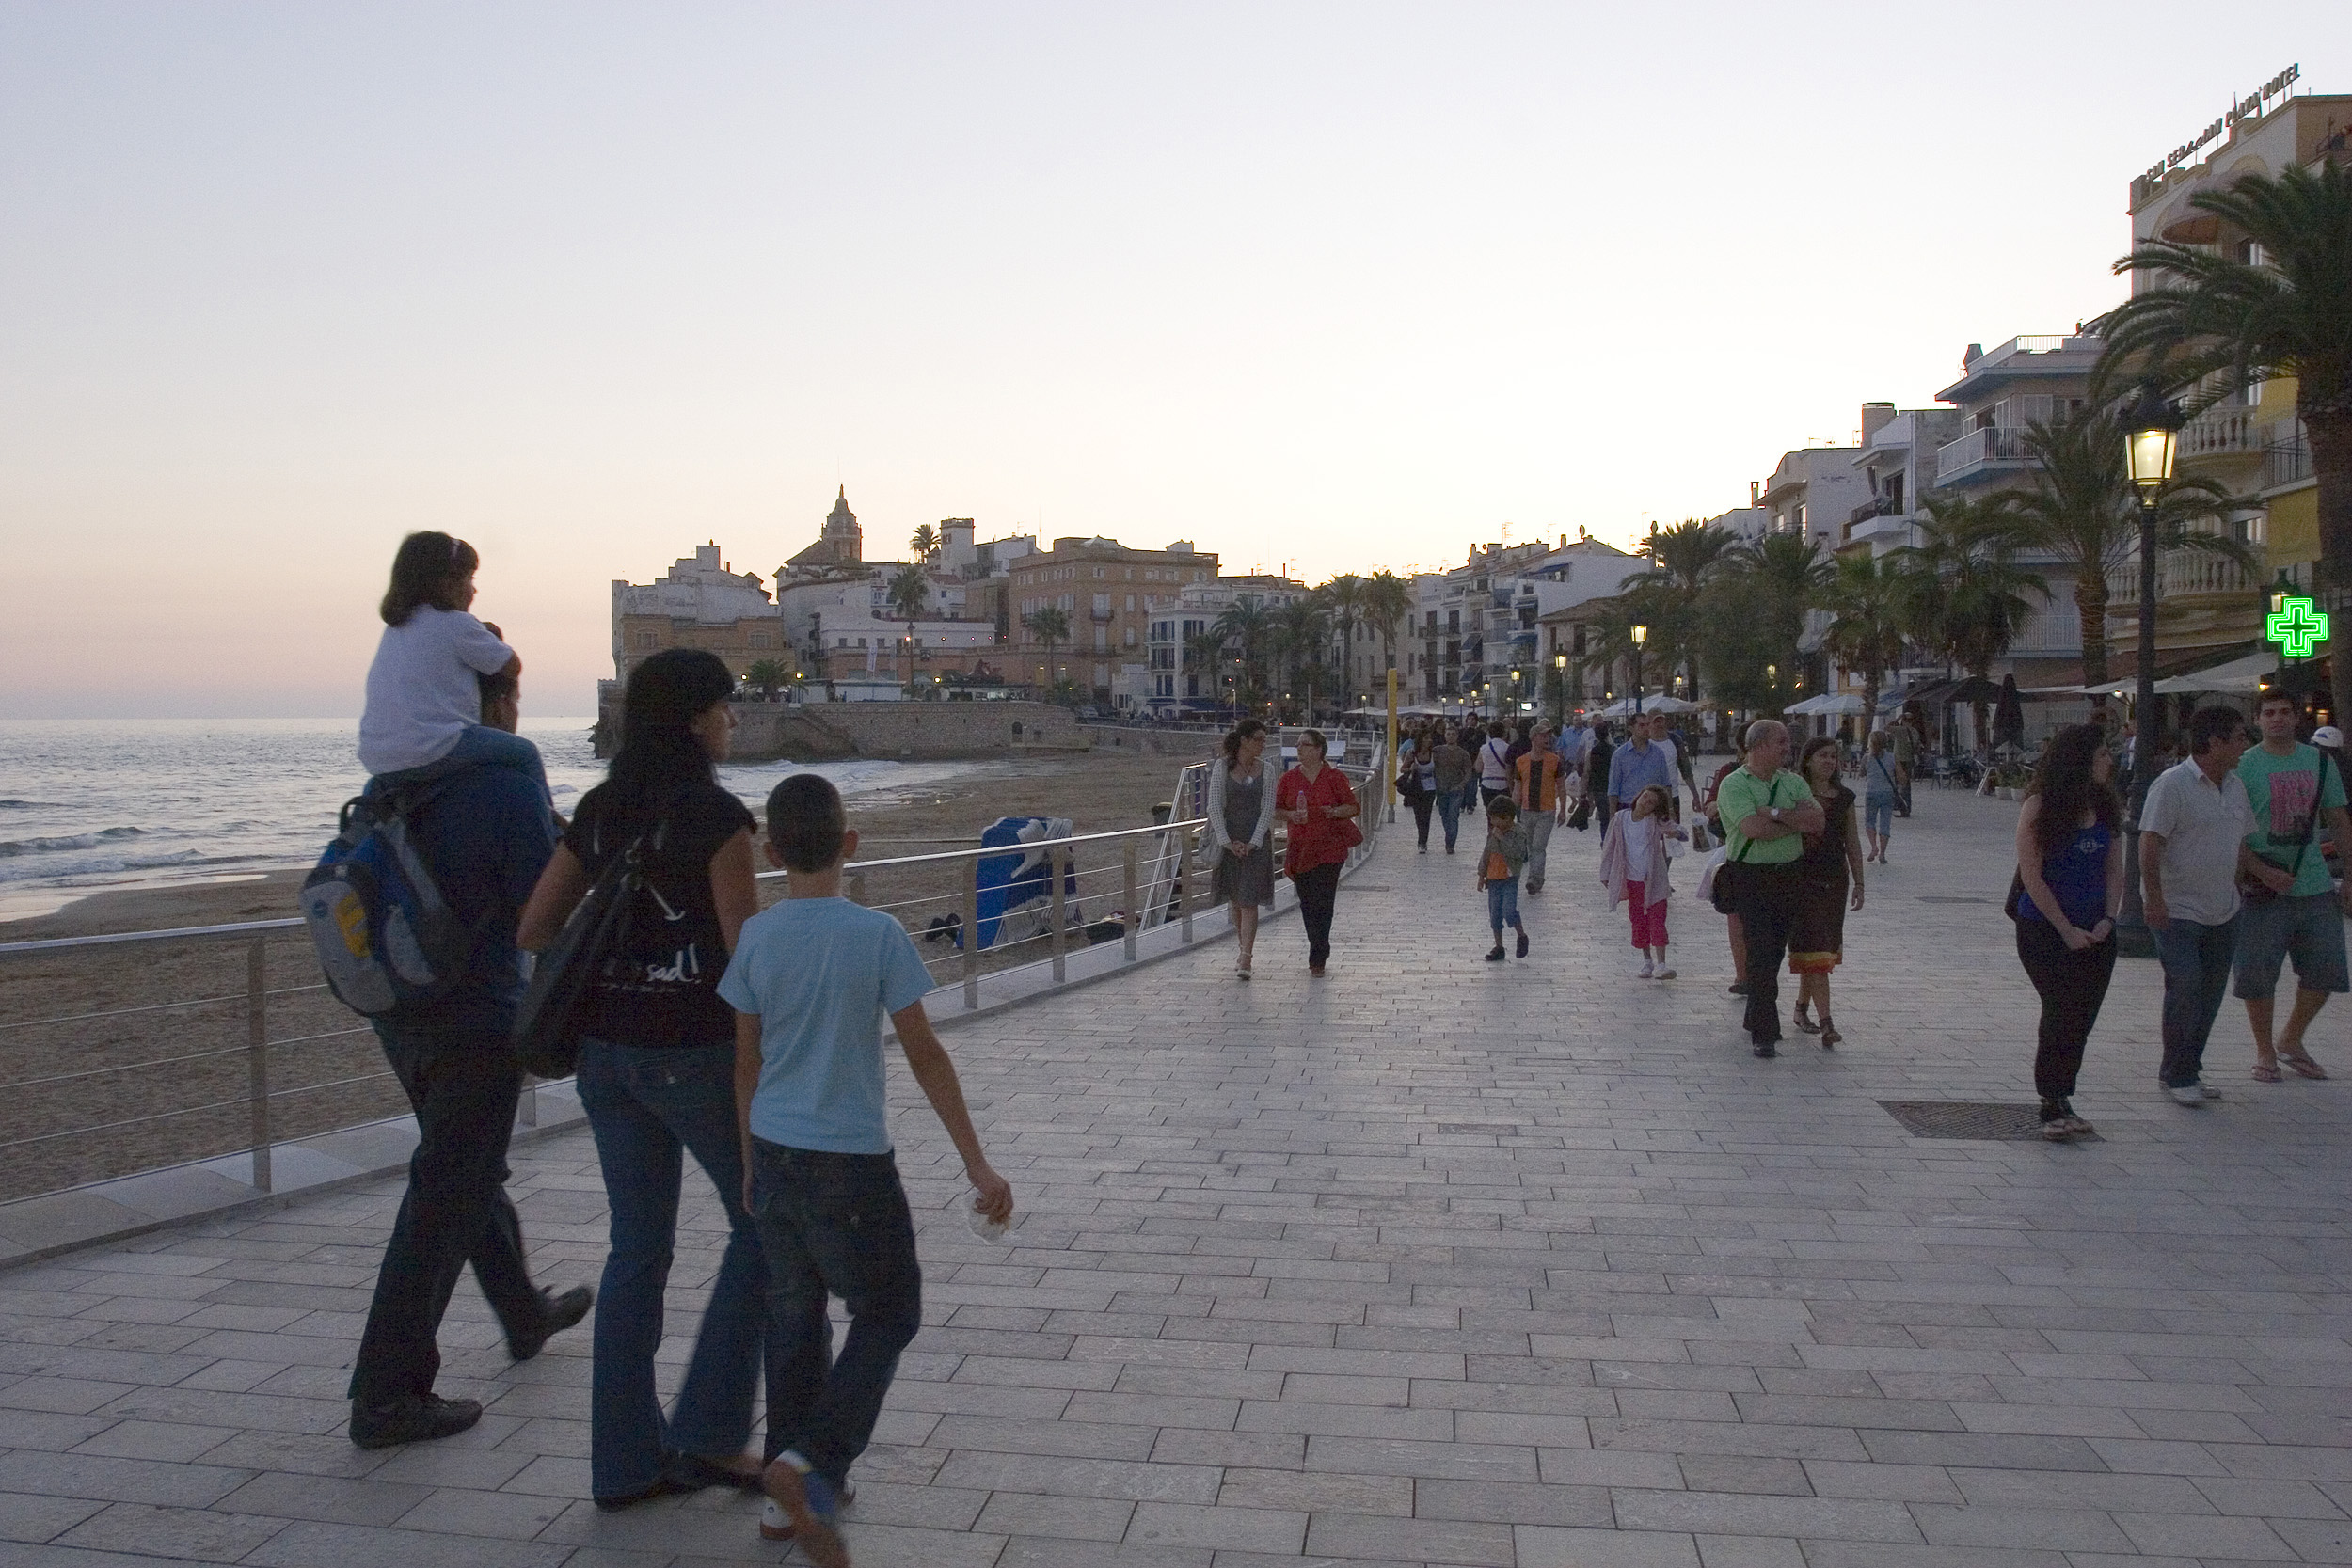 Busy and trendy coastal town of Sitges